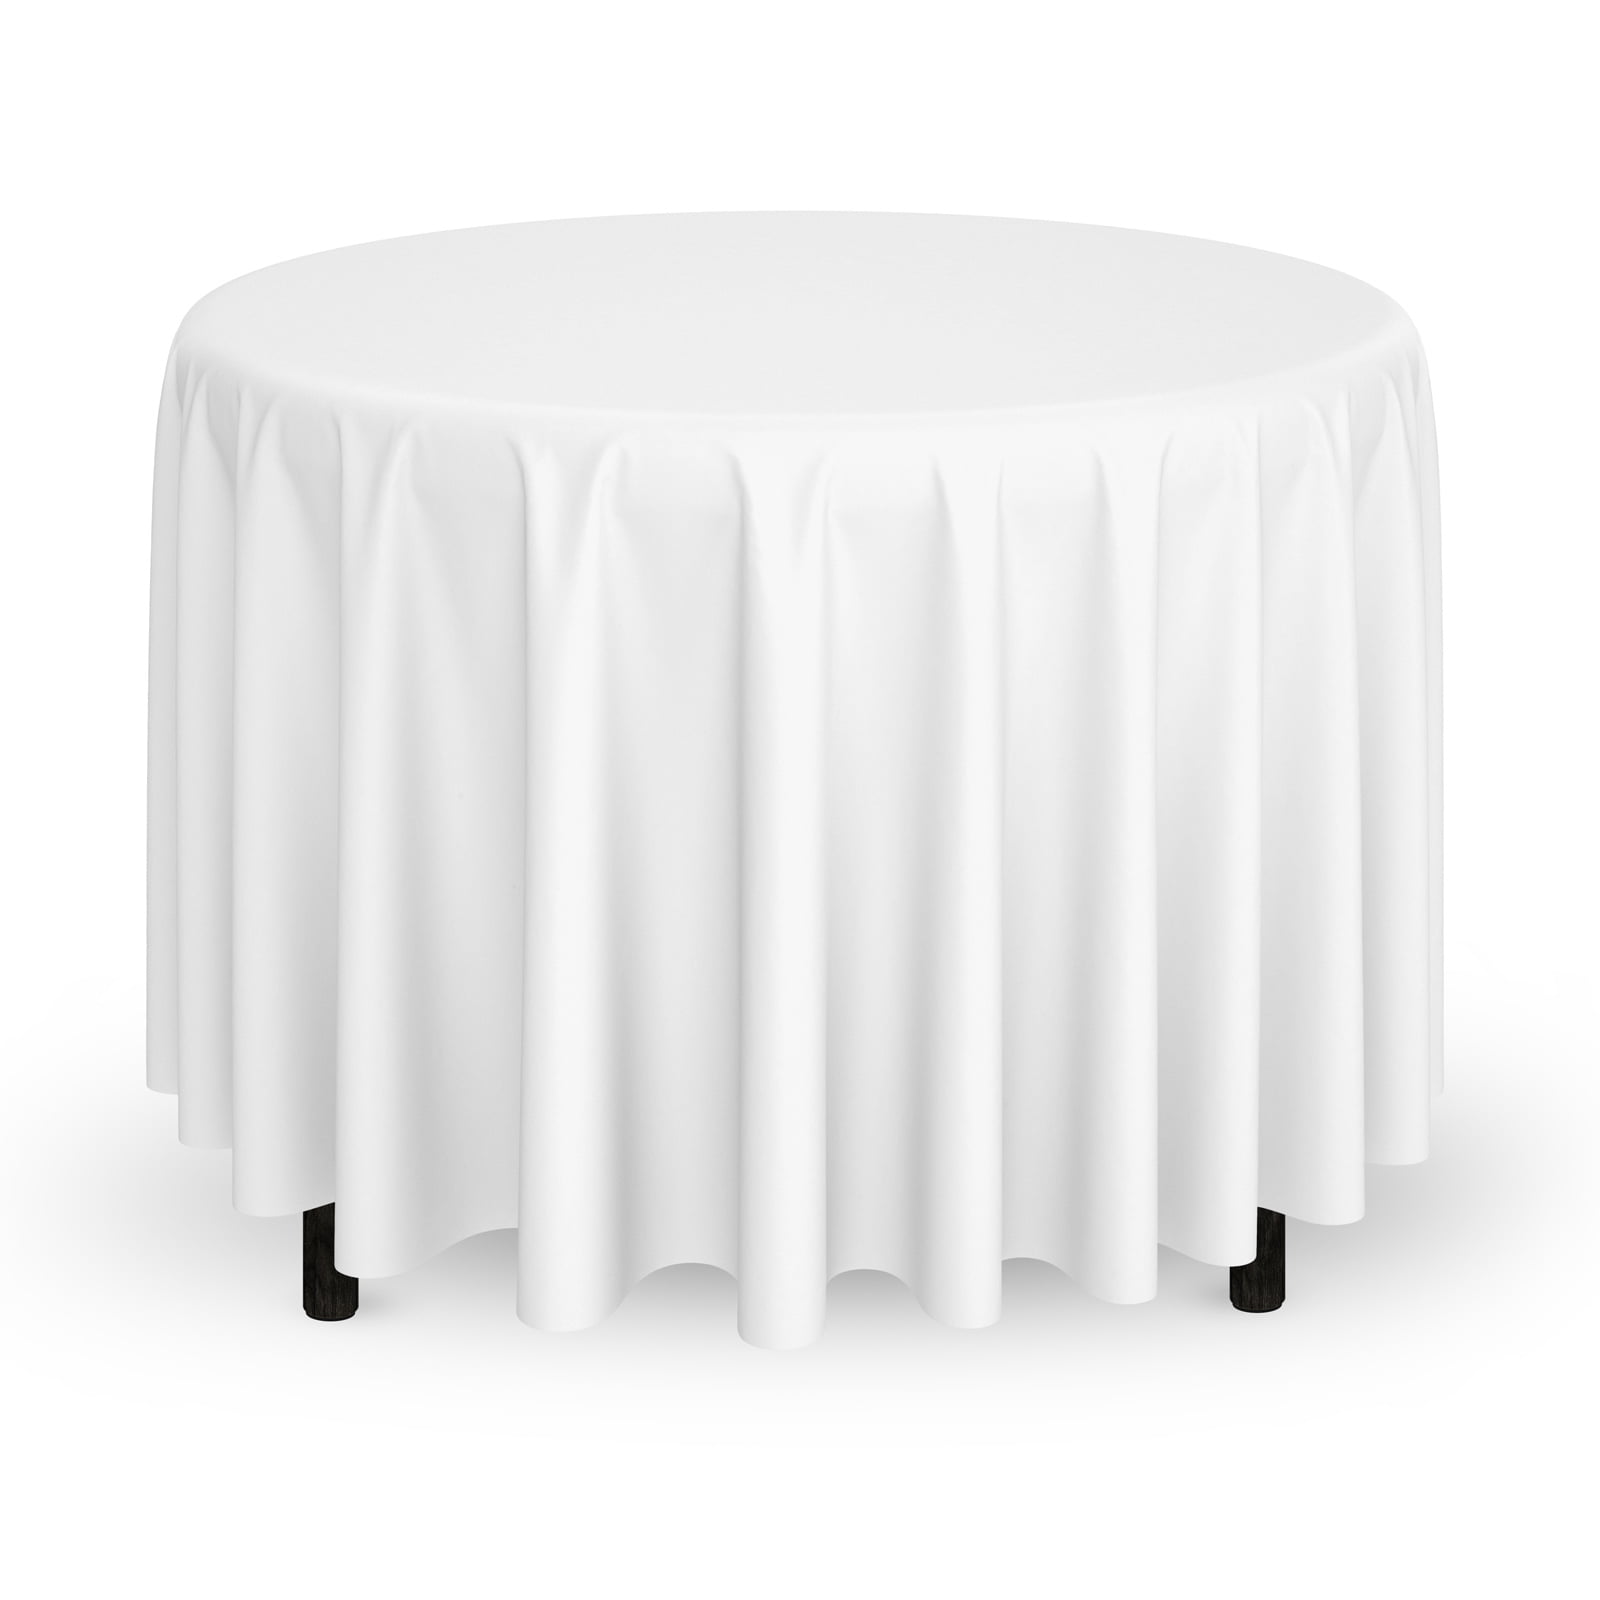 Polyester Fabric Table Cloths, White Tablecloth Round 108